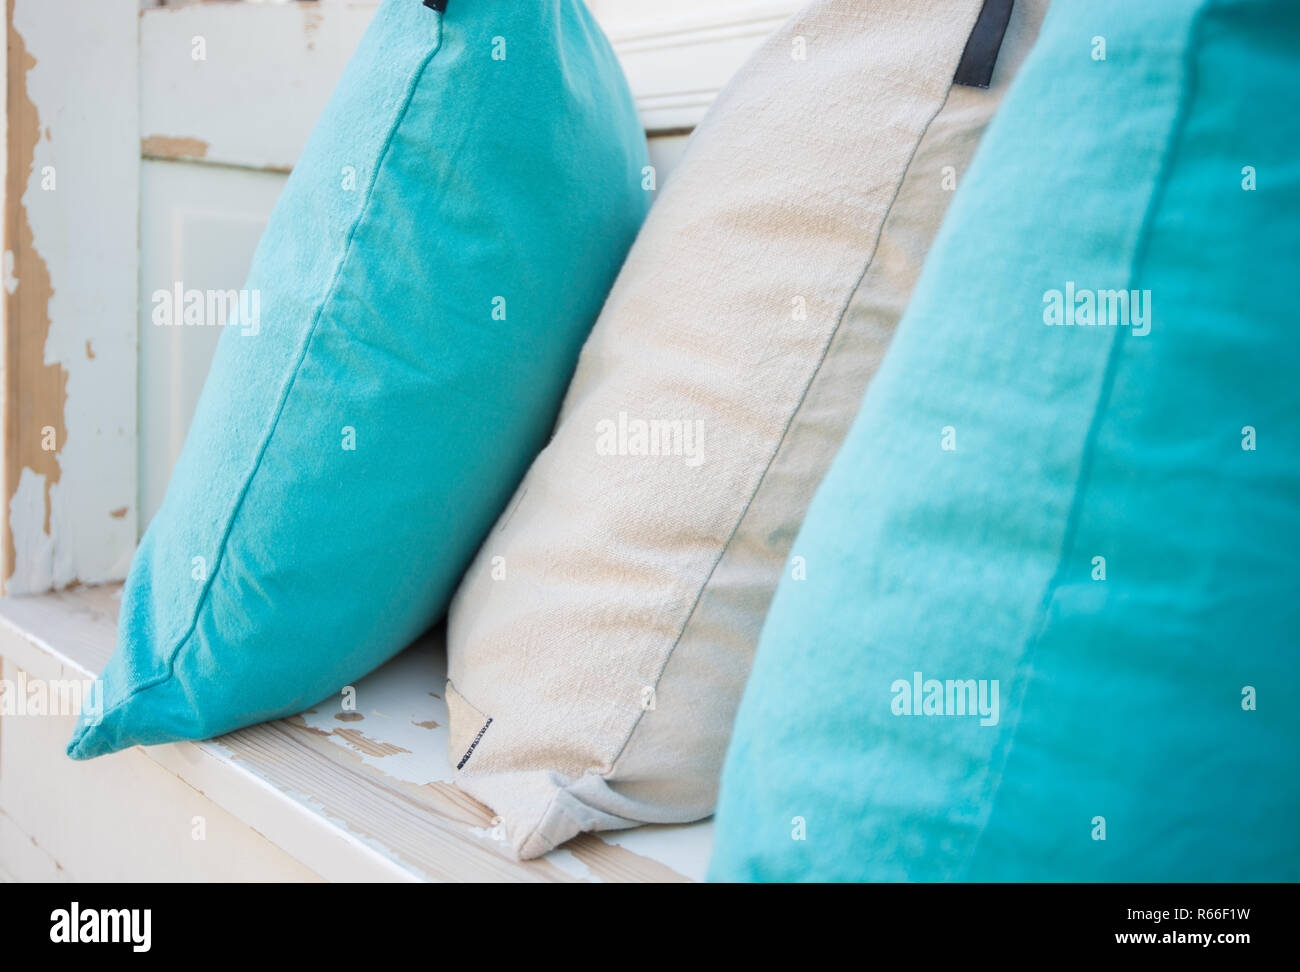 Colourful pillows on white wooden bench Stock Photo